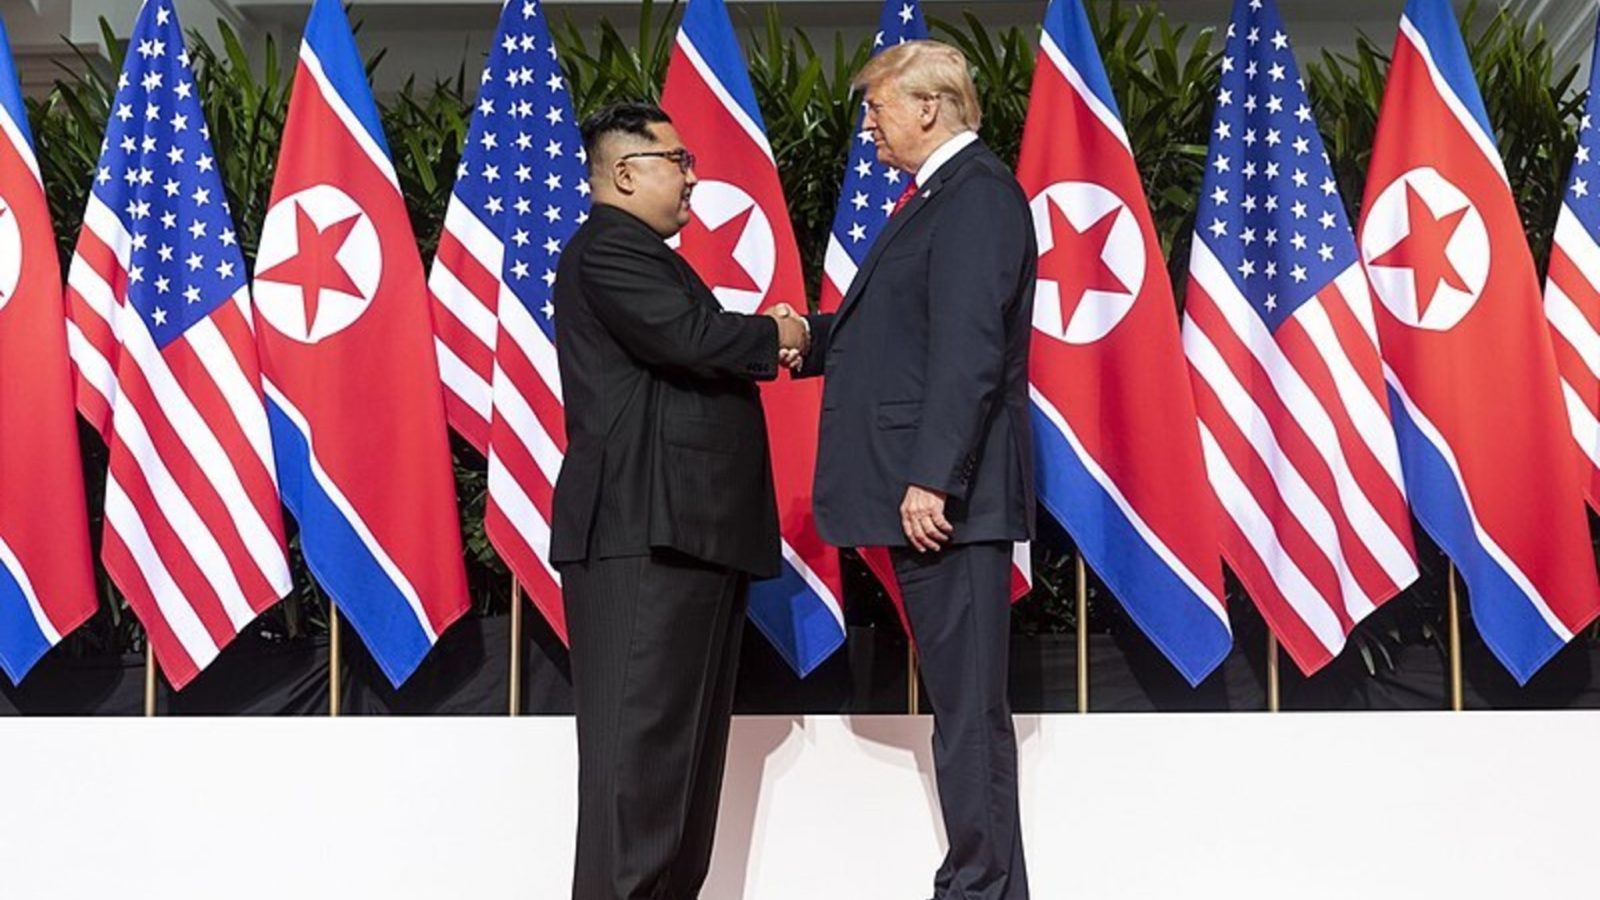 Donald trump and Kim Jong Un shanking hands in front of US and North Korean Flags